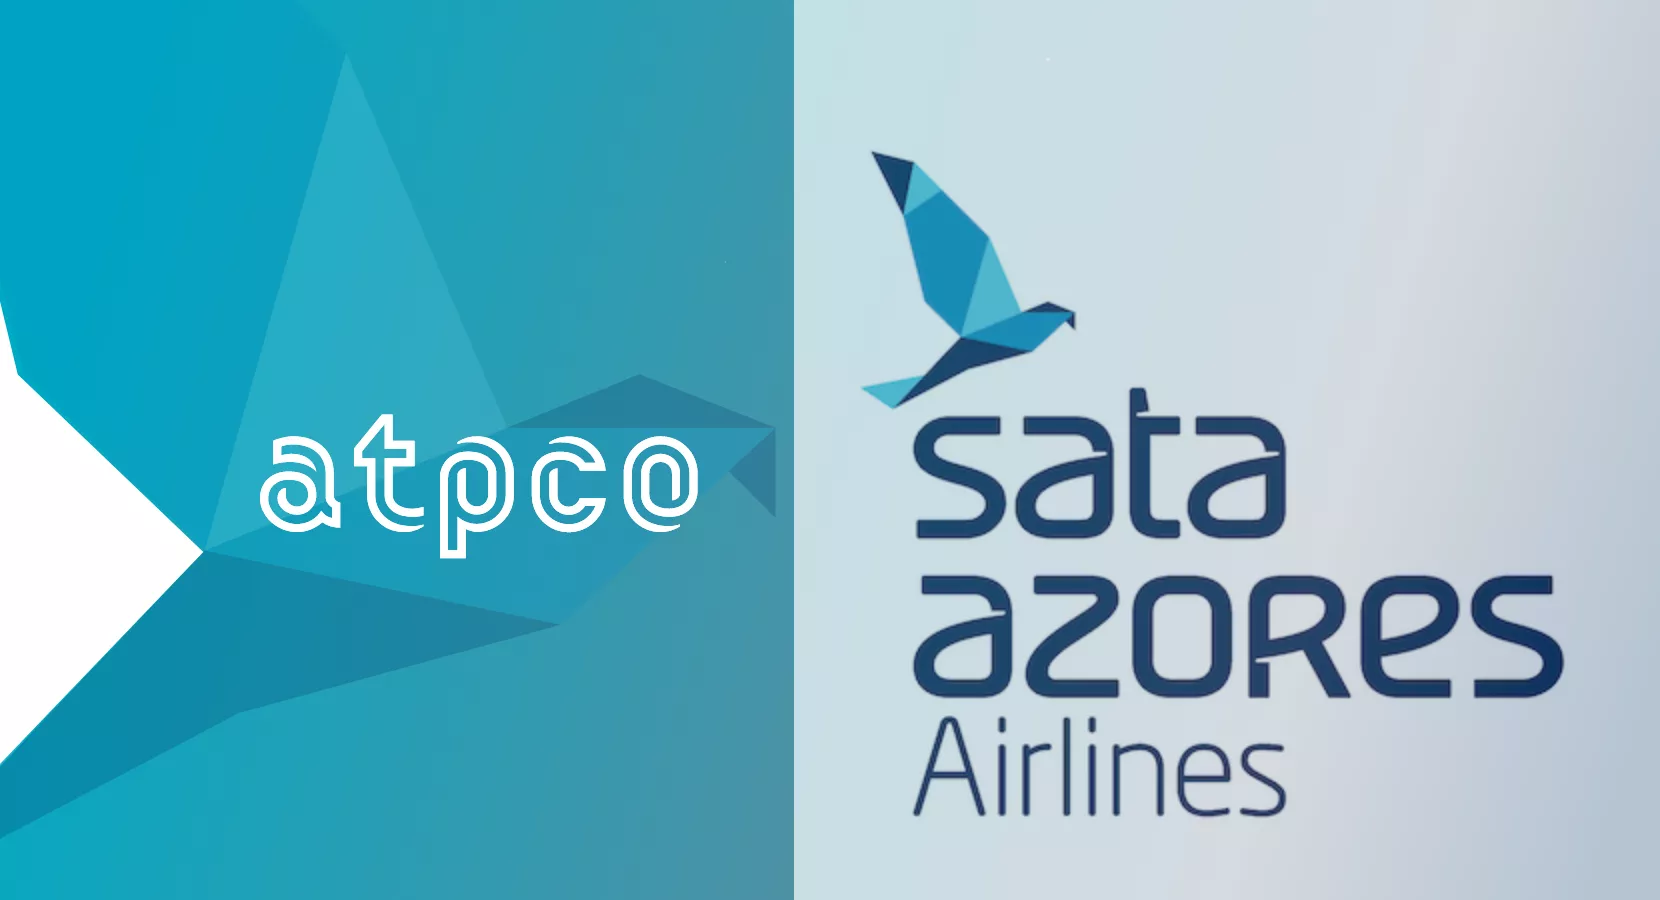 Routehappy and SATA Azores Airlines: Redefining the way their customers shop for flights